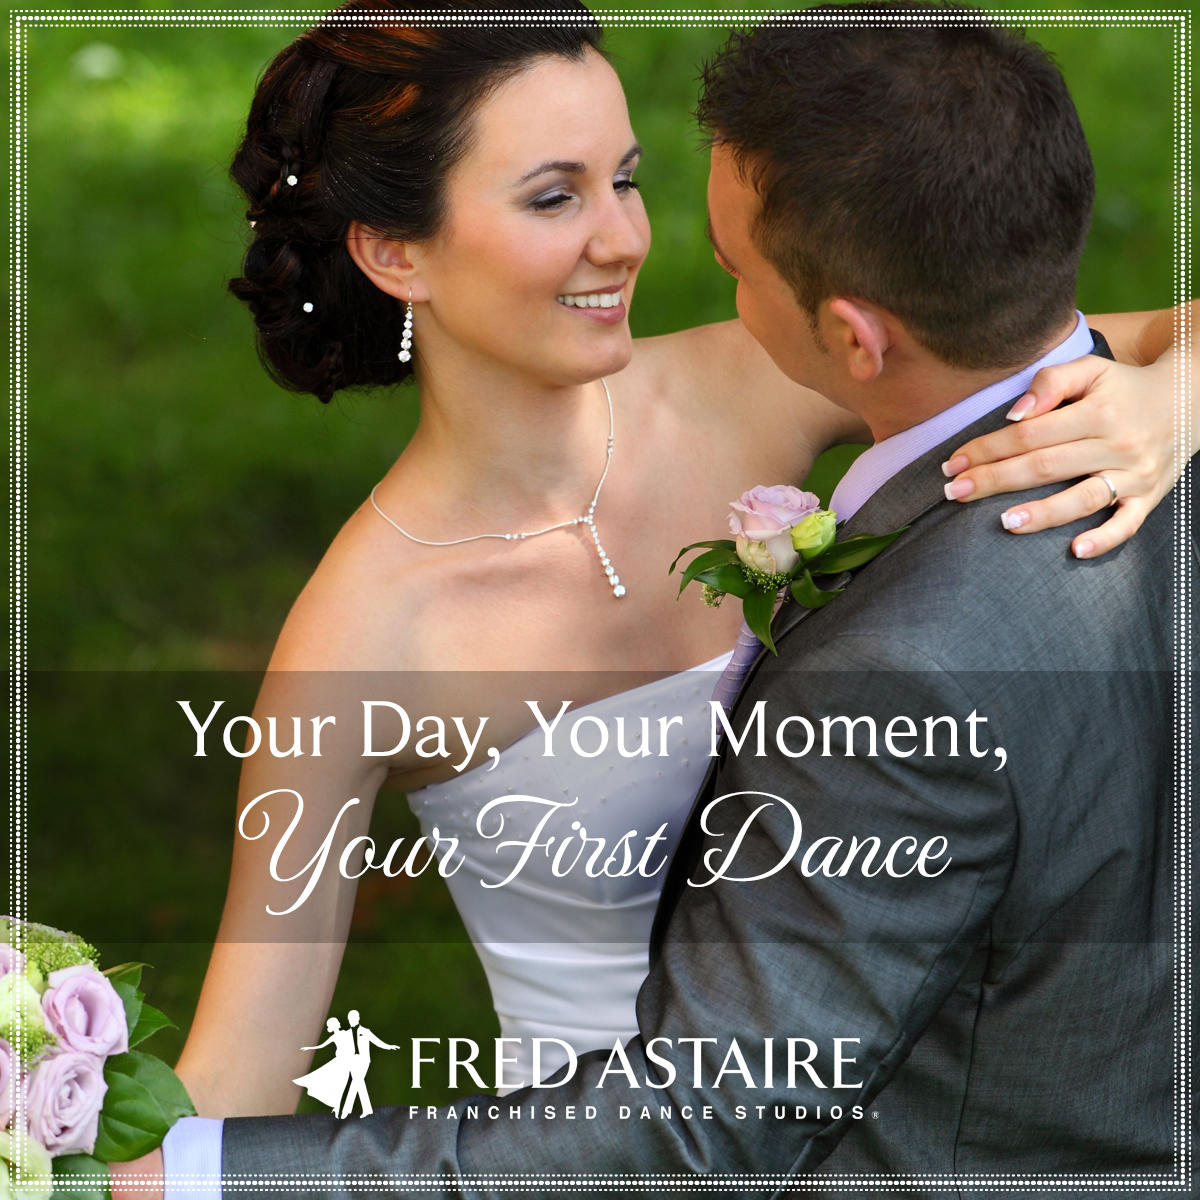 Are you getting married and looking to learn your first wedding  dance ? Then the Fred Astaire Dance Studios - Riverside is the place for you to learn! We teach in Private Dance Lessons, Group Dance Lessons and of course we have Parties for you to practice at! Call today to learn more! 401-415-9766